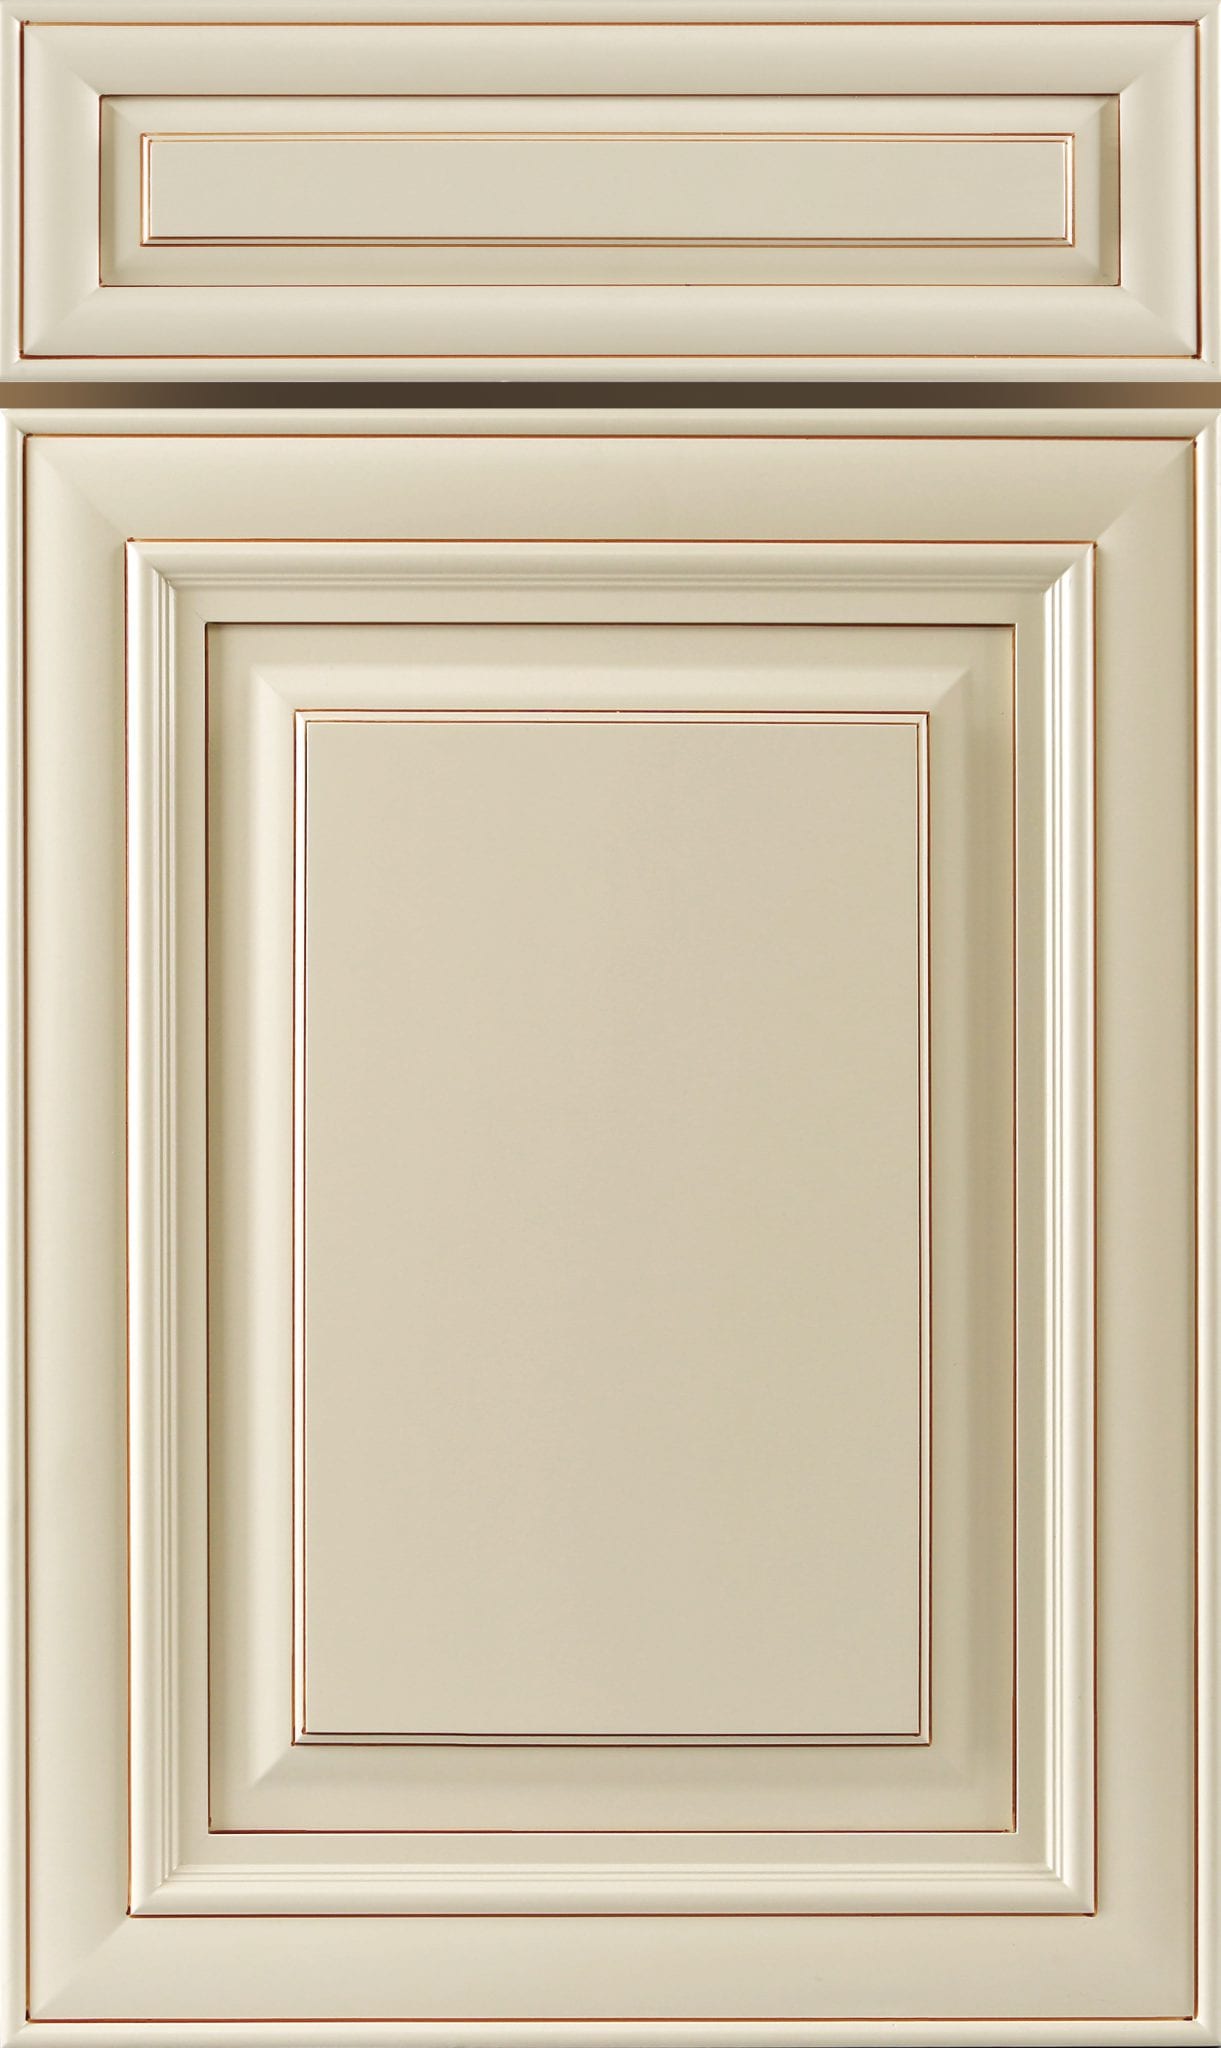 A7 - Crème Glazed Cabinetry